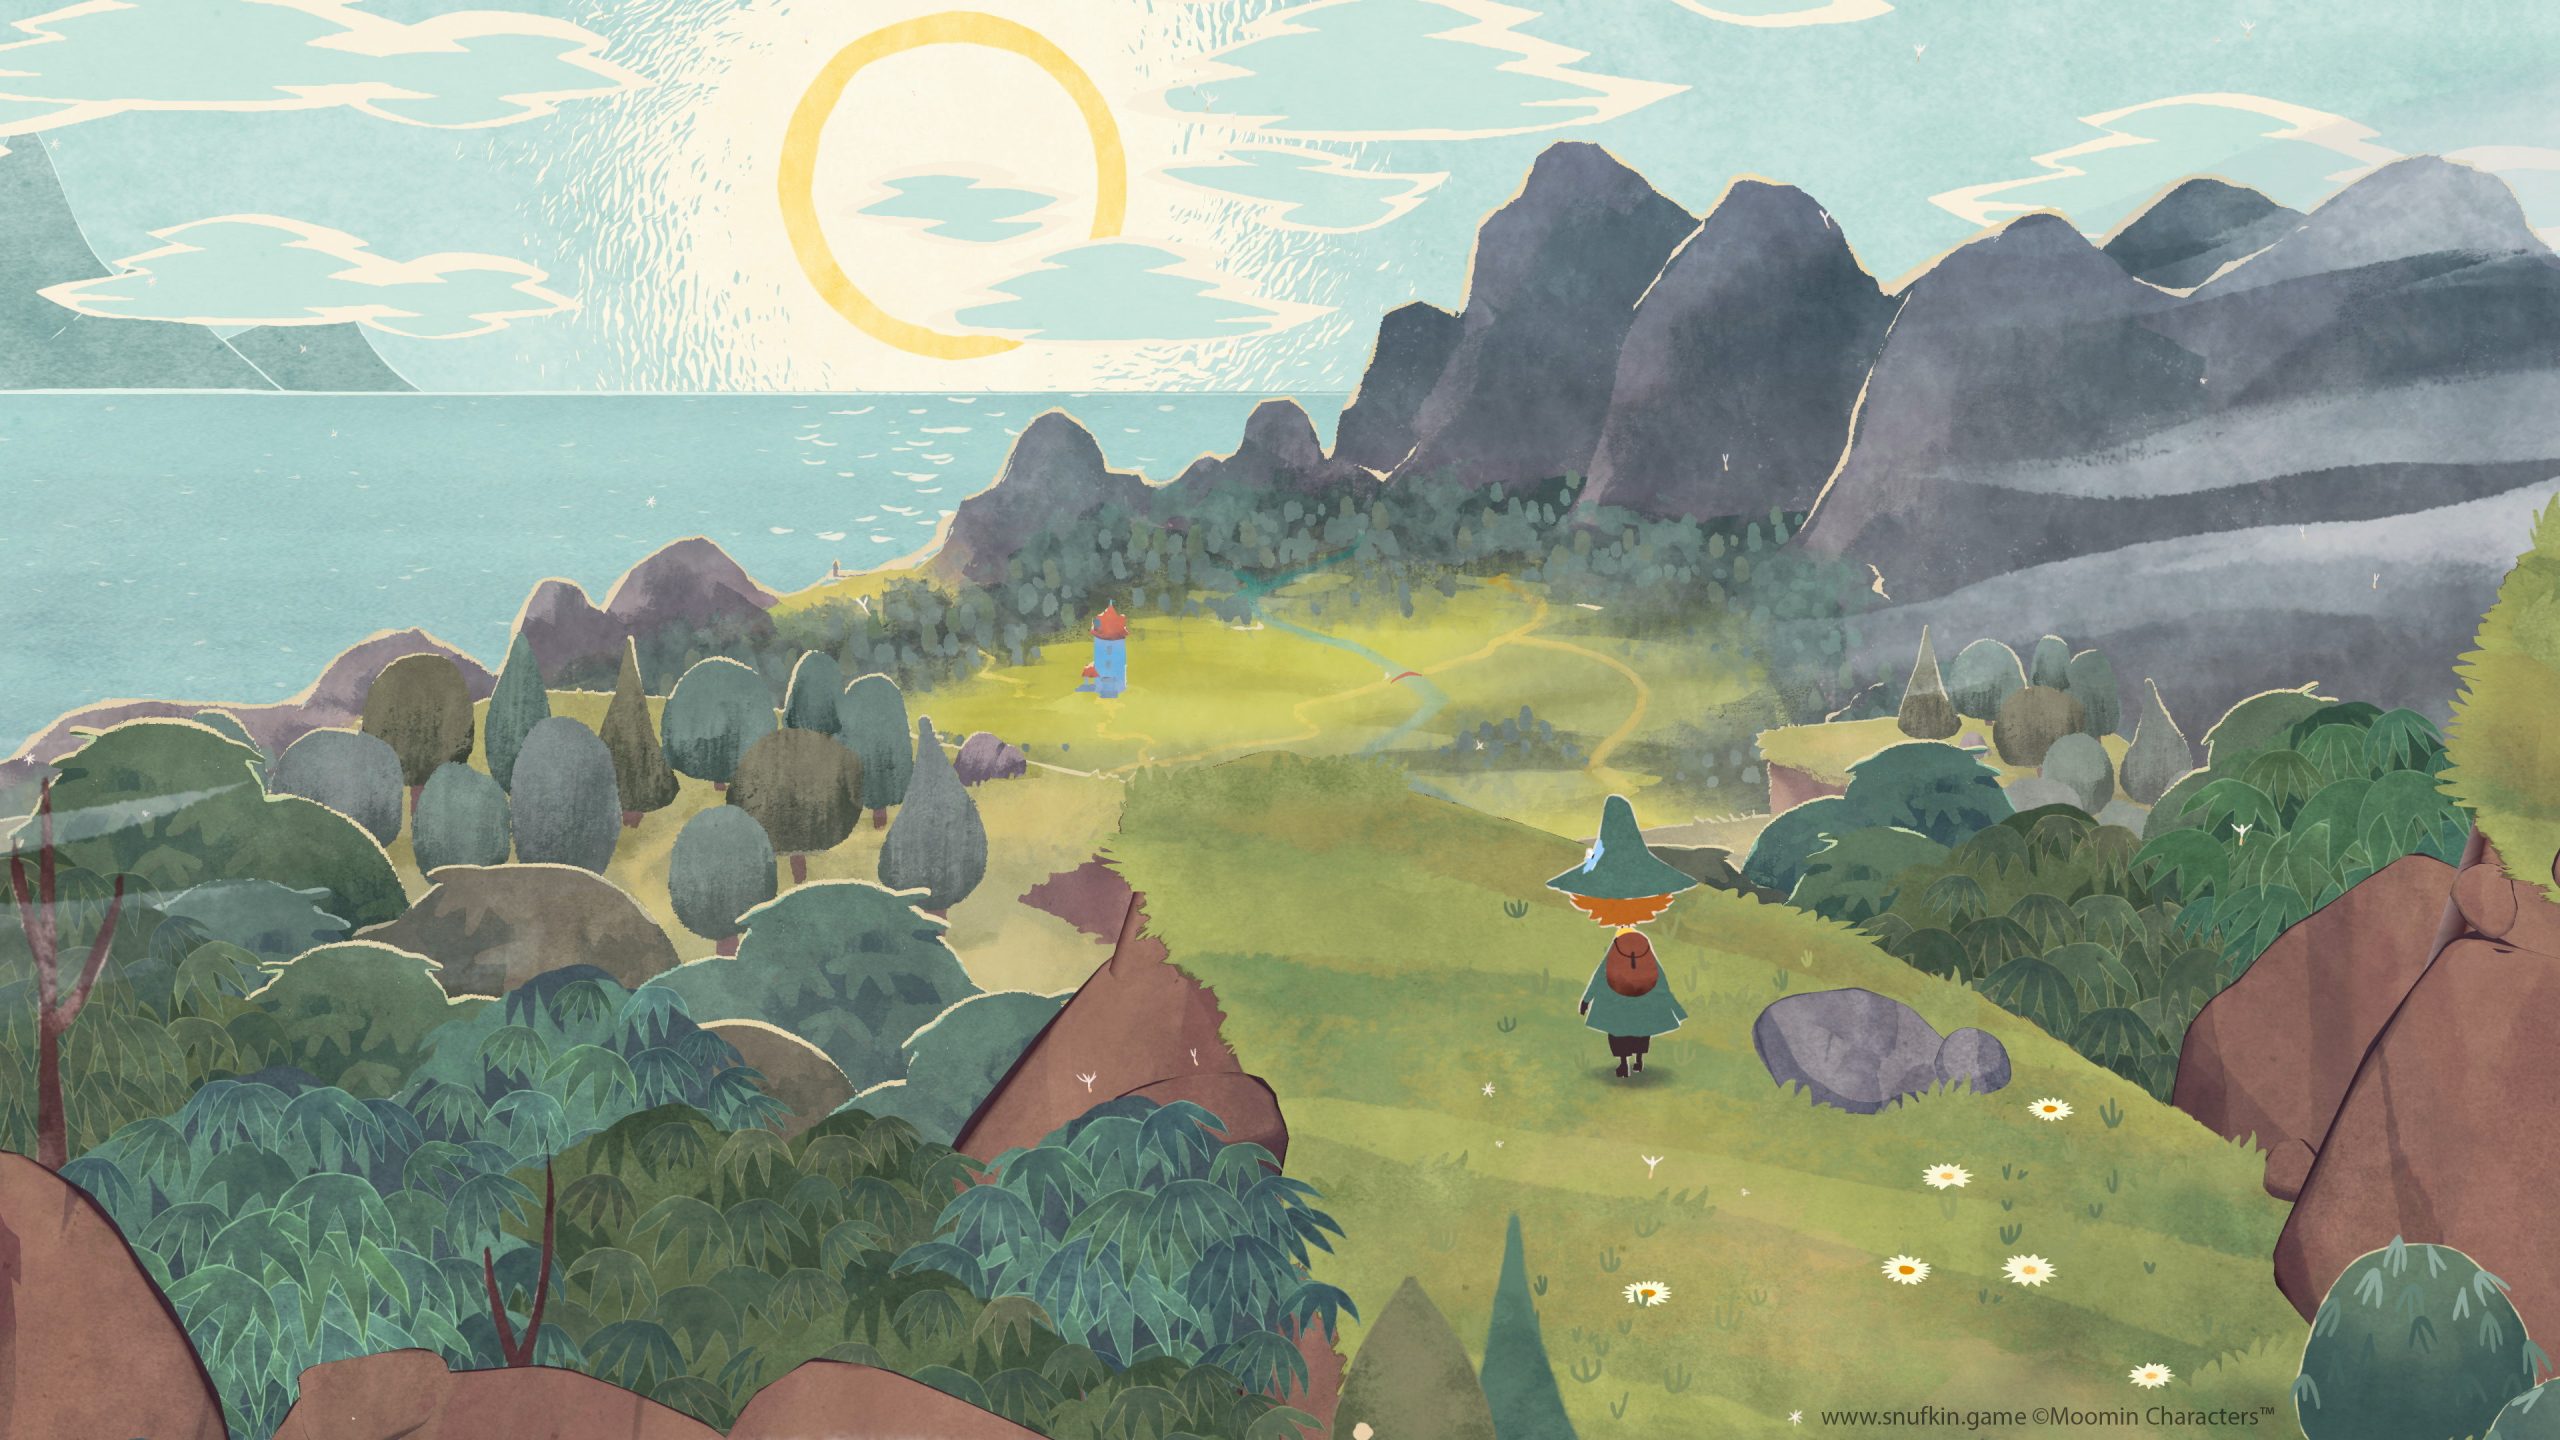 A screenshot from the Snufkin/Moomin video game